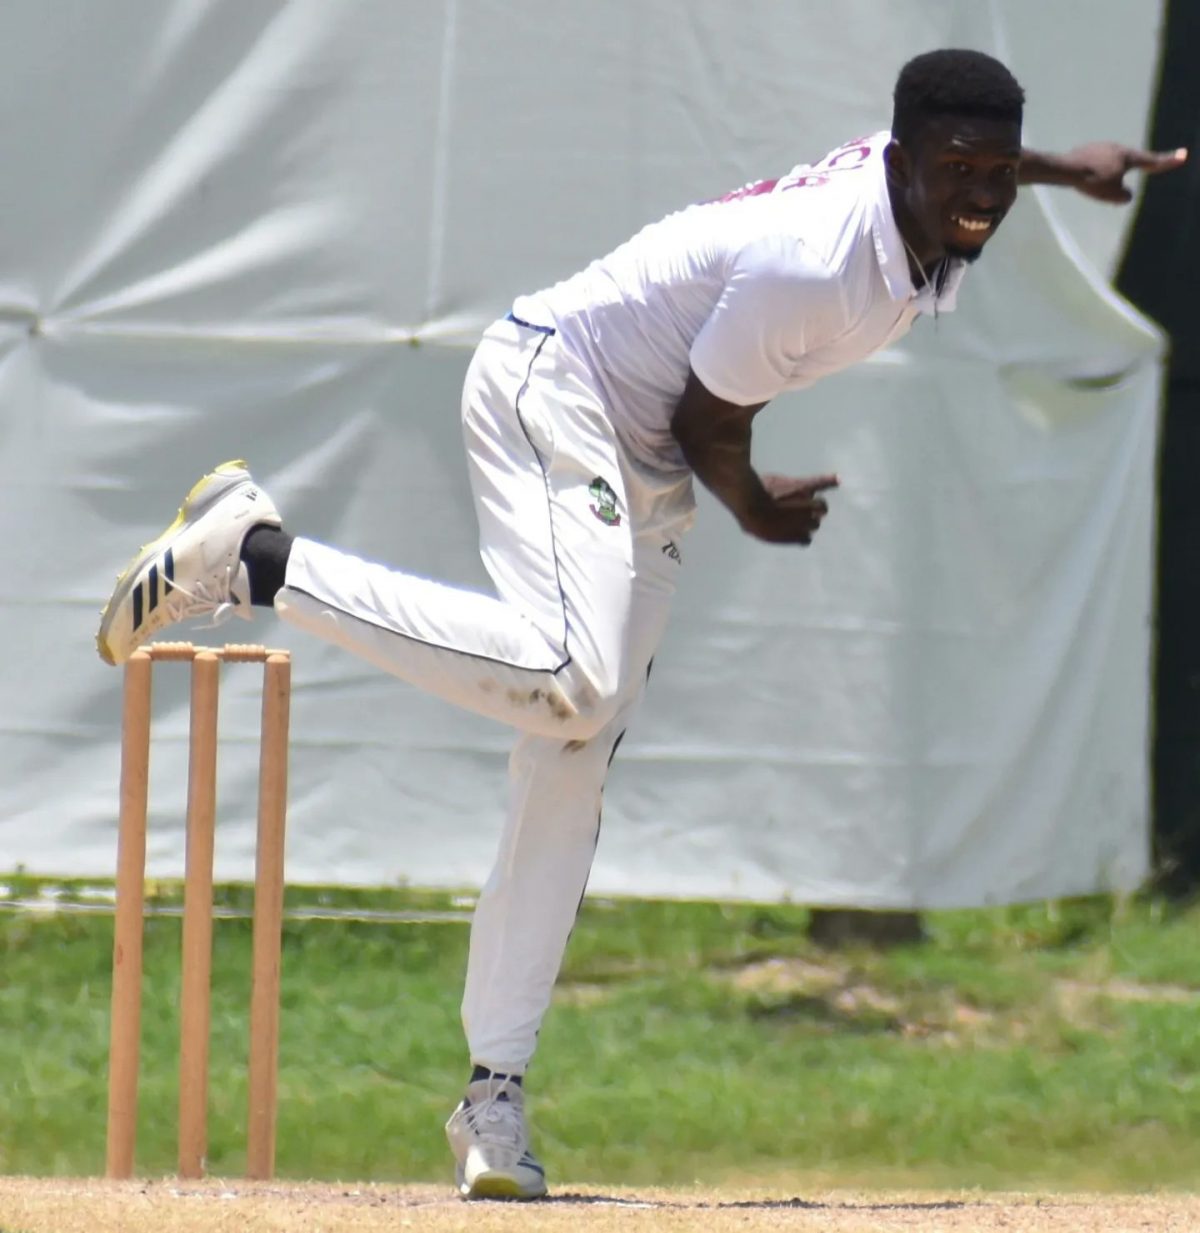 Team Weekes off-spinner Kevin Sinclair sends down another delivery during his destructive spell against Team Headley in the Headley-Weekes Tri-Series yesterday at the Coolidge Cricket Ground in Antigua. (CWI Media photo)